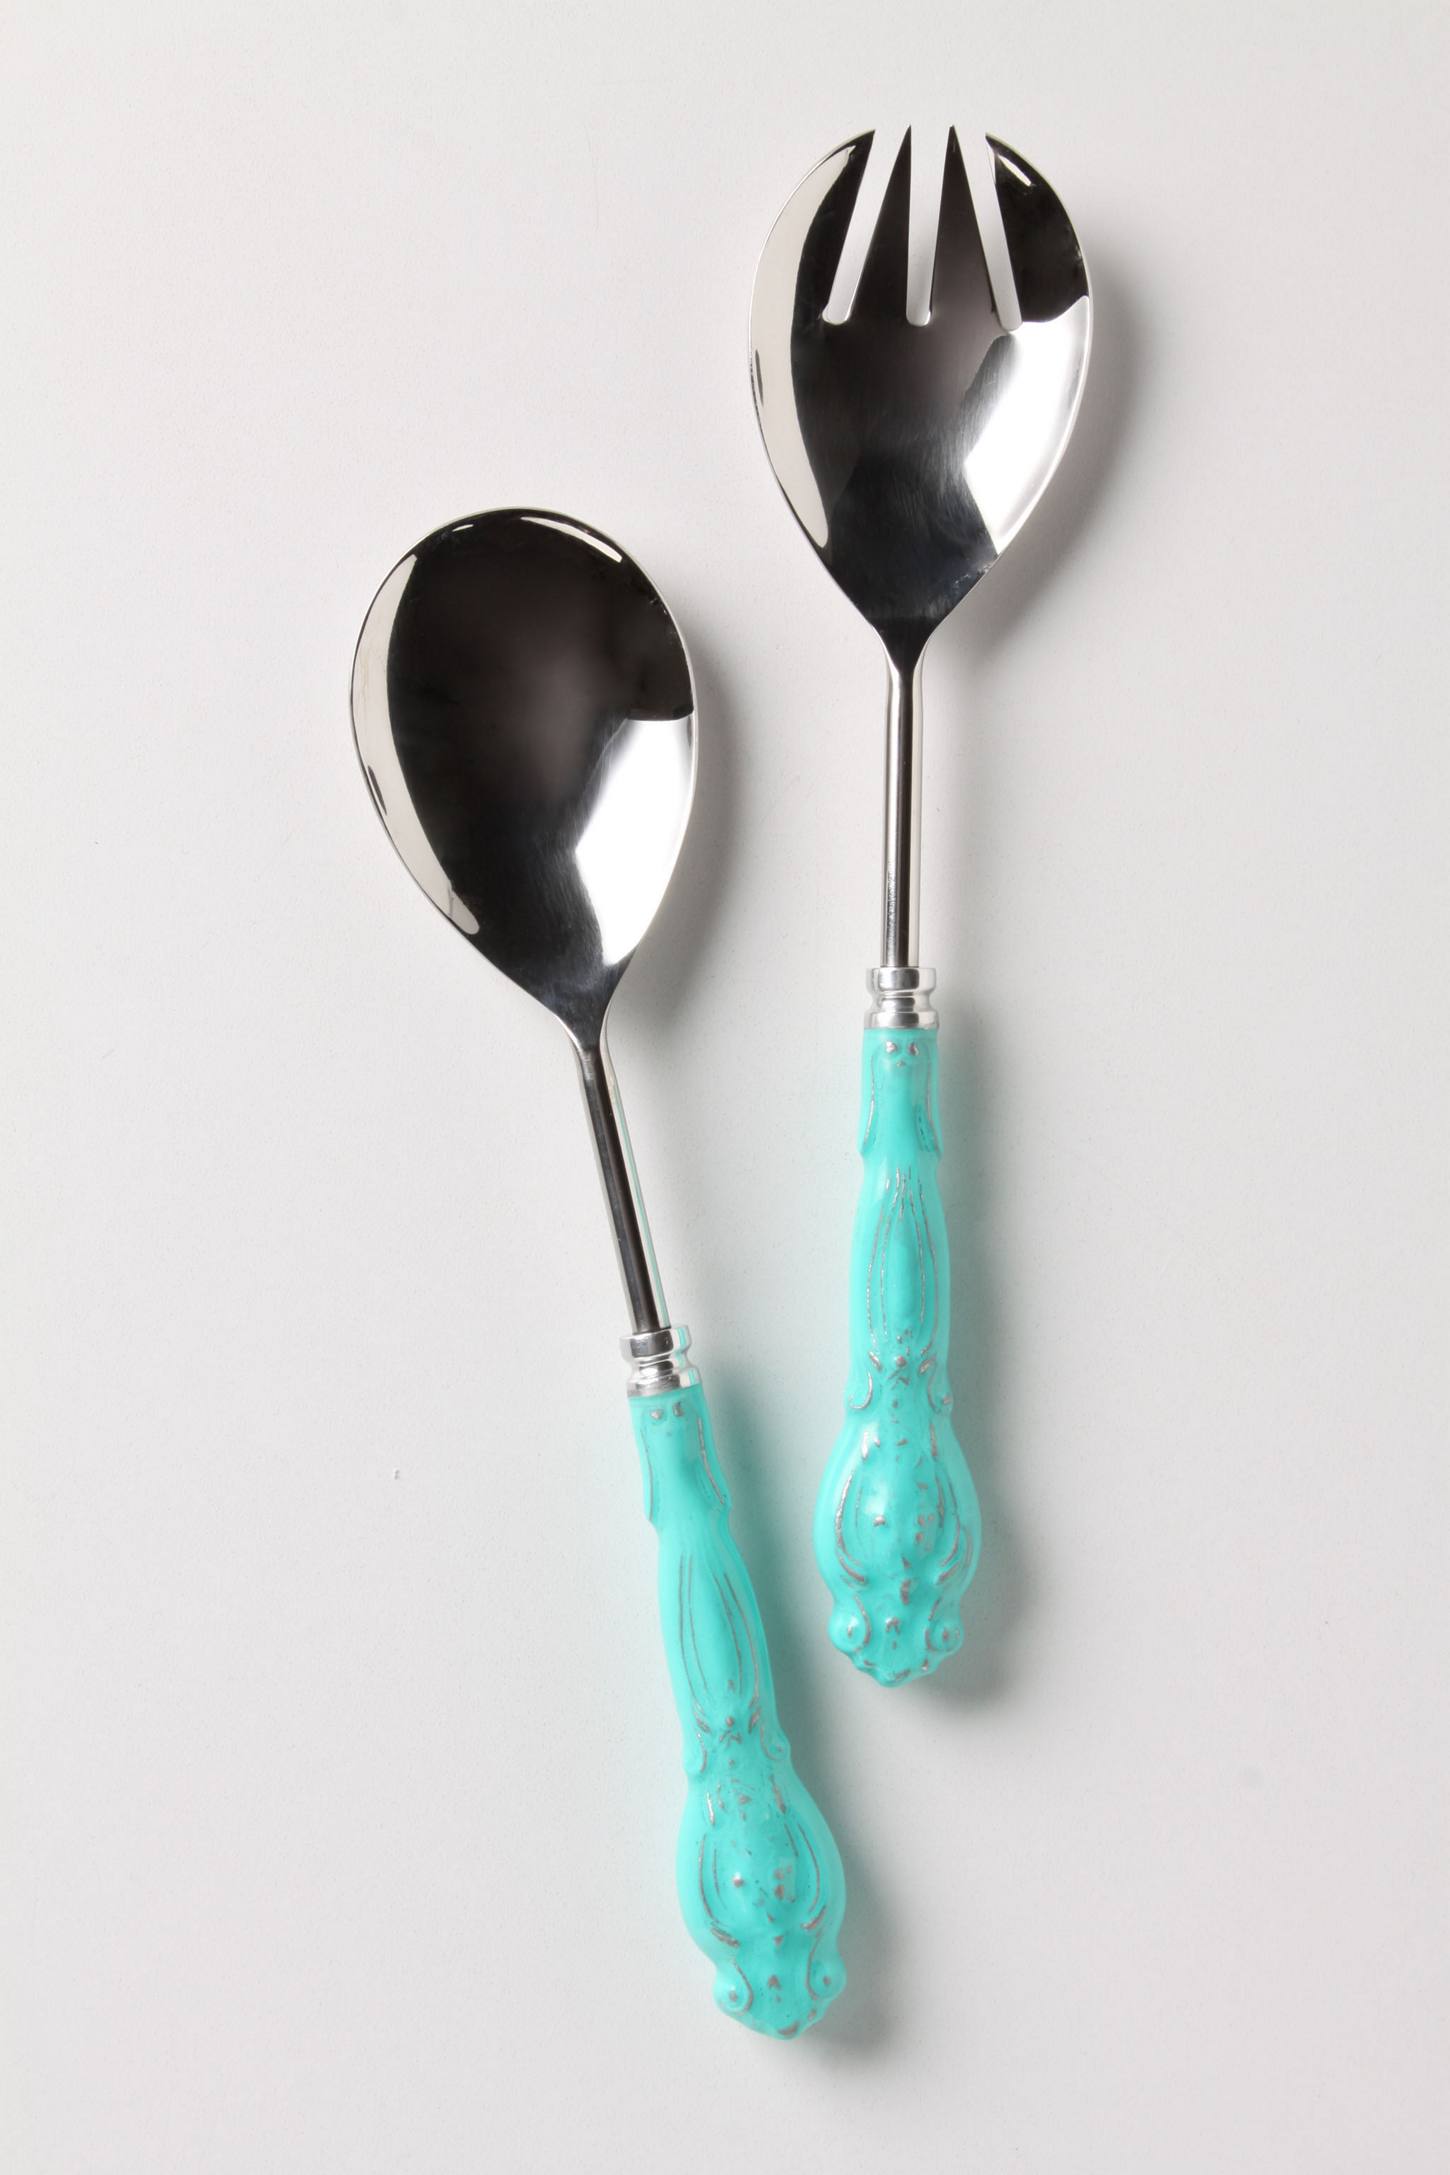 Two Blue Enamel-dipped servers from Anthropologie 